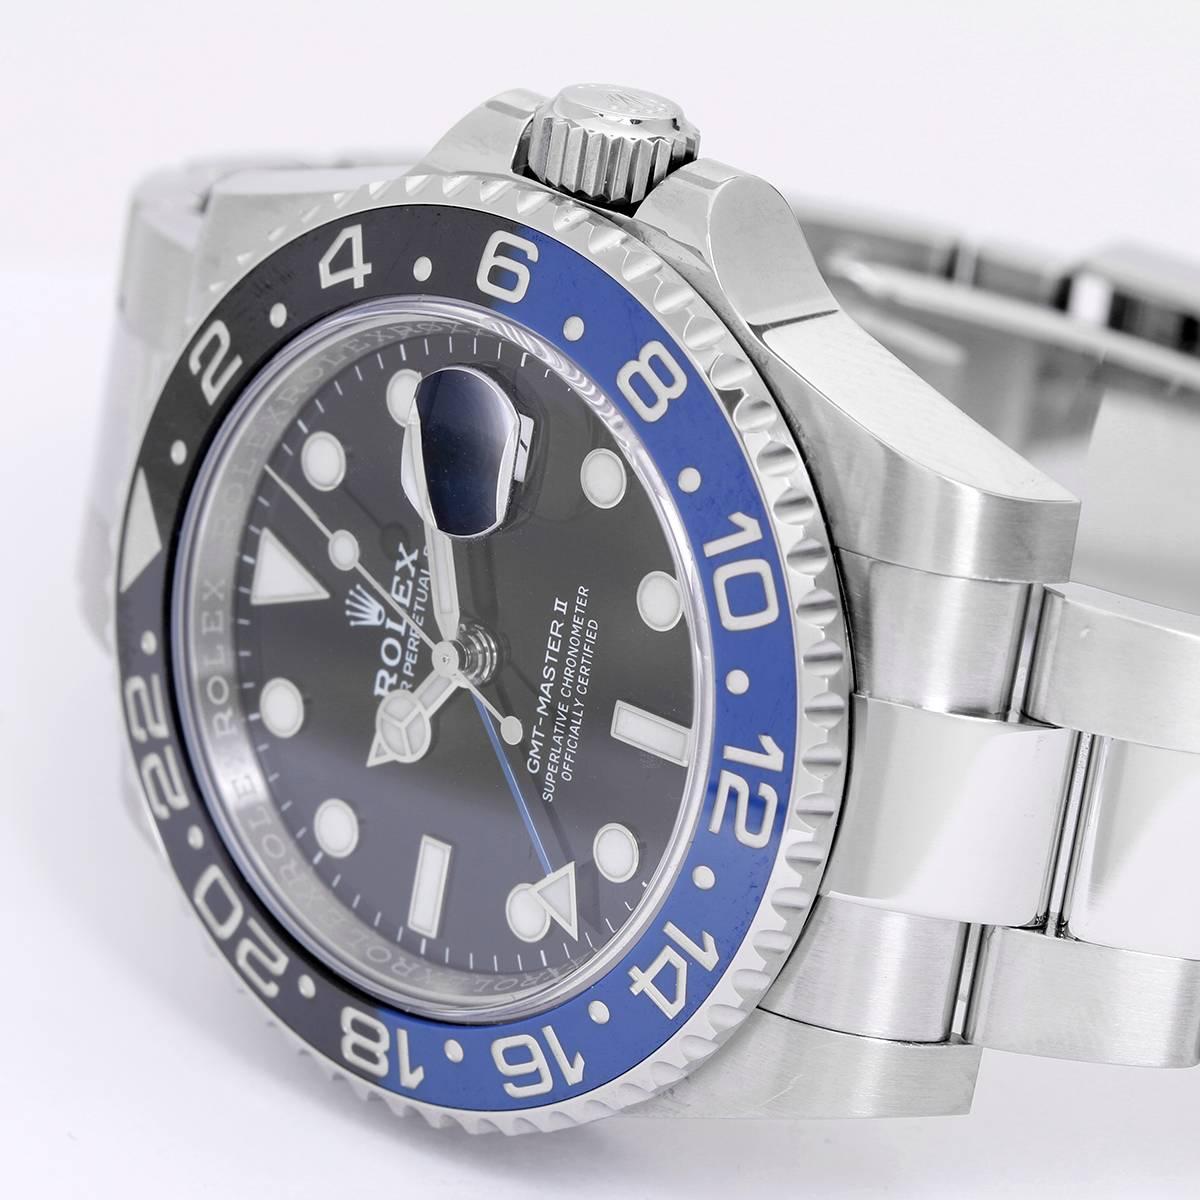 Men's Rolex GMT-Master II Watch 116710 (116710B) -  Automatic winding, 31 jewels. Stainless steel case with 24 hour ceramic blue and black bezel (40mm diameter). Black dial with luminous markers; blue GMT hand. Stainless steel Oyster bracelet with